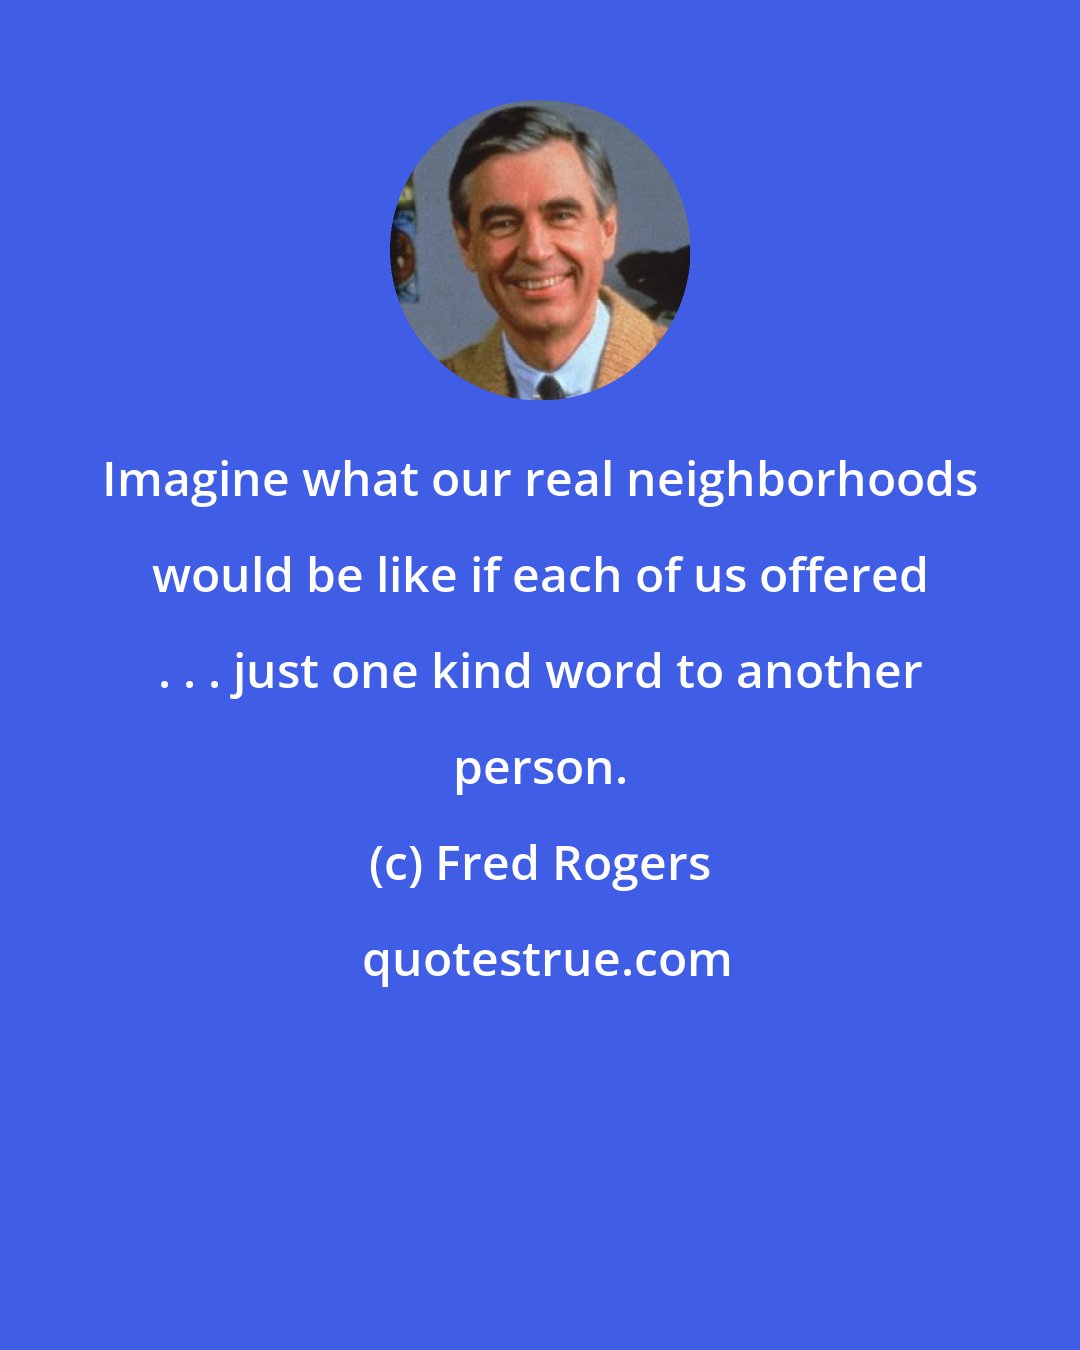 Fred Rogers: Imagine what our real neighborhoods would be like if each of us offered . . . just one kind word to another person.